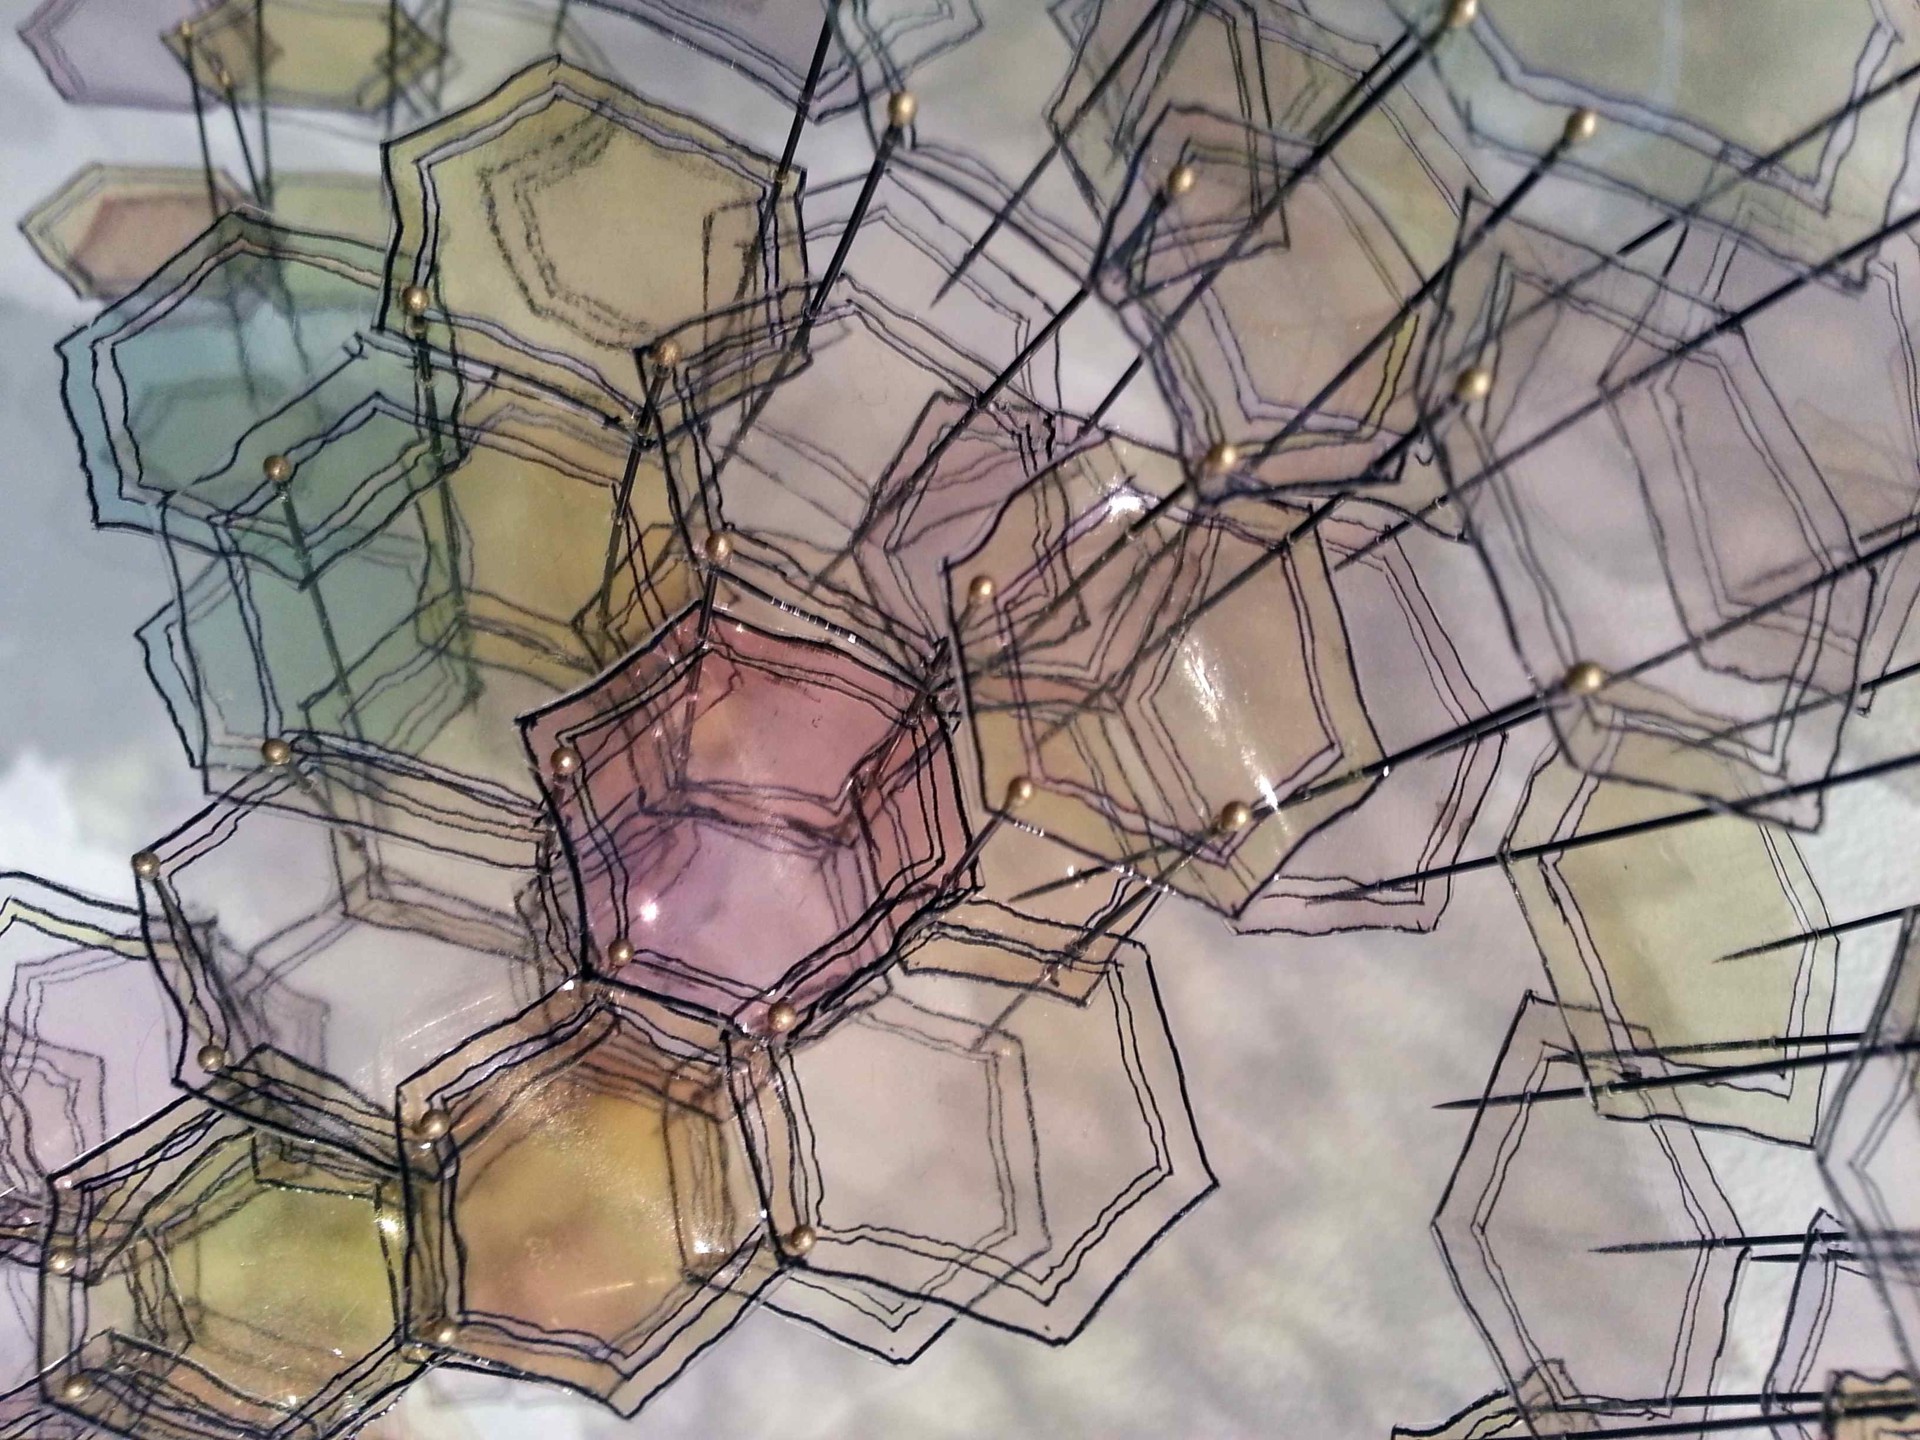 Pink and Gold Hexagons #1 (detail) by Paul Booker